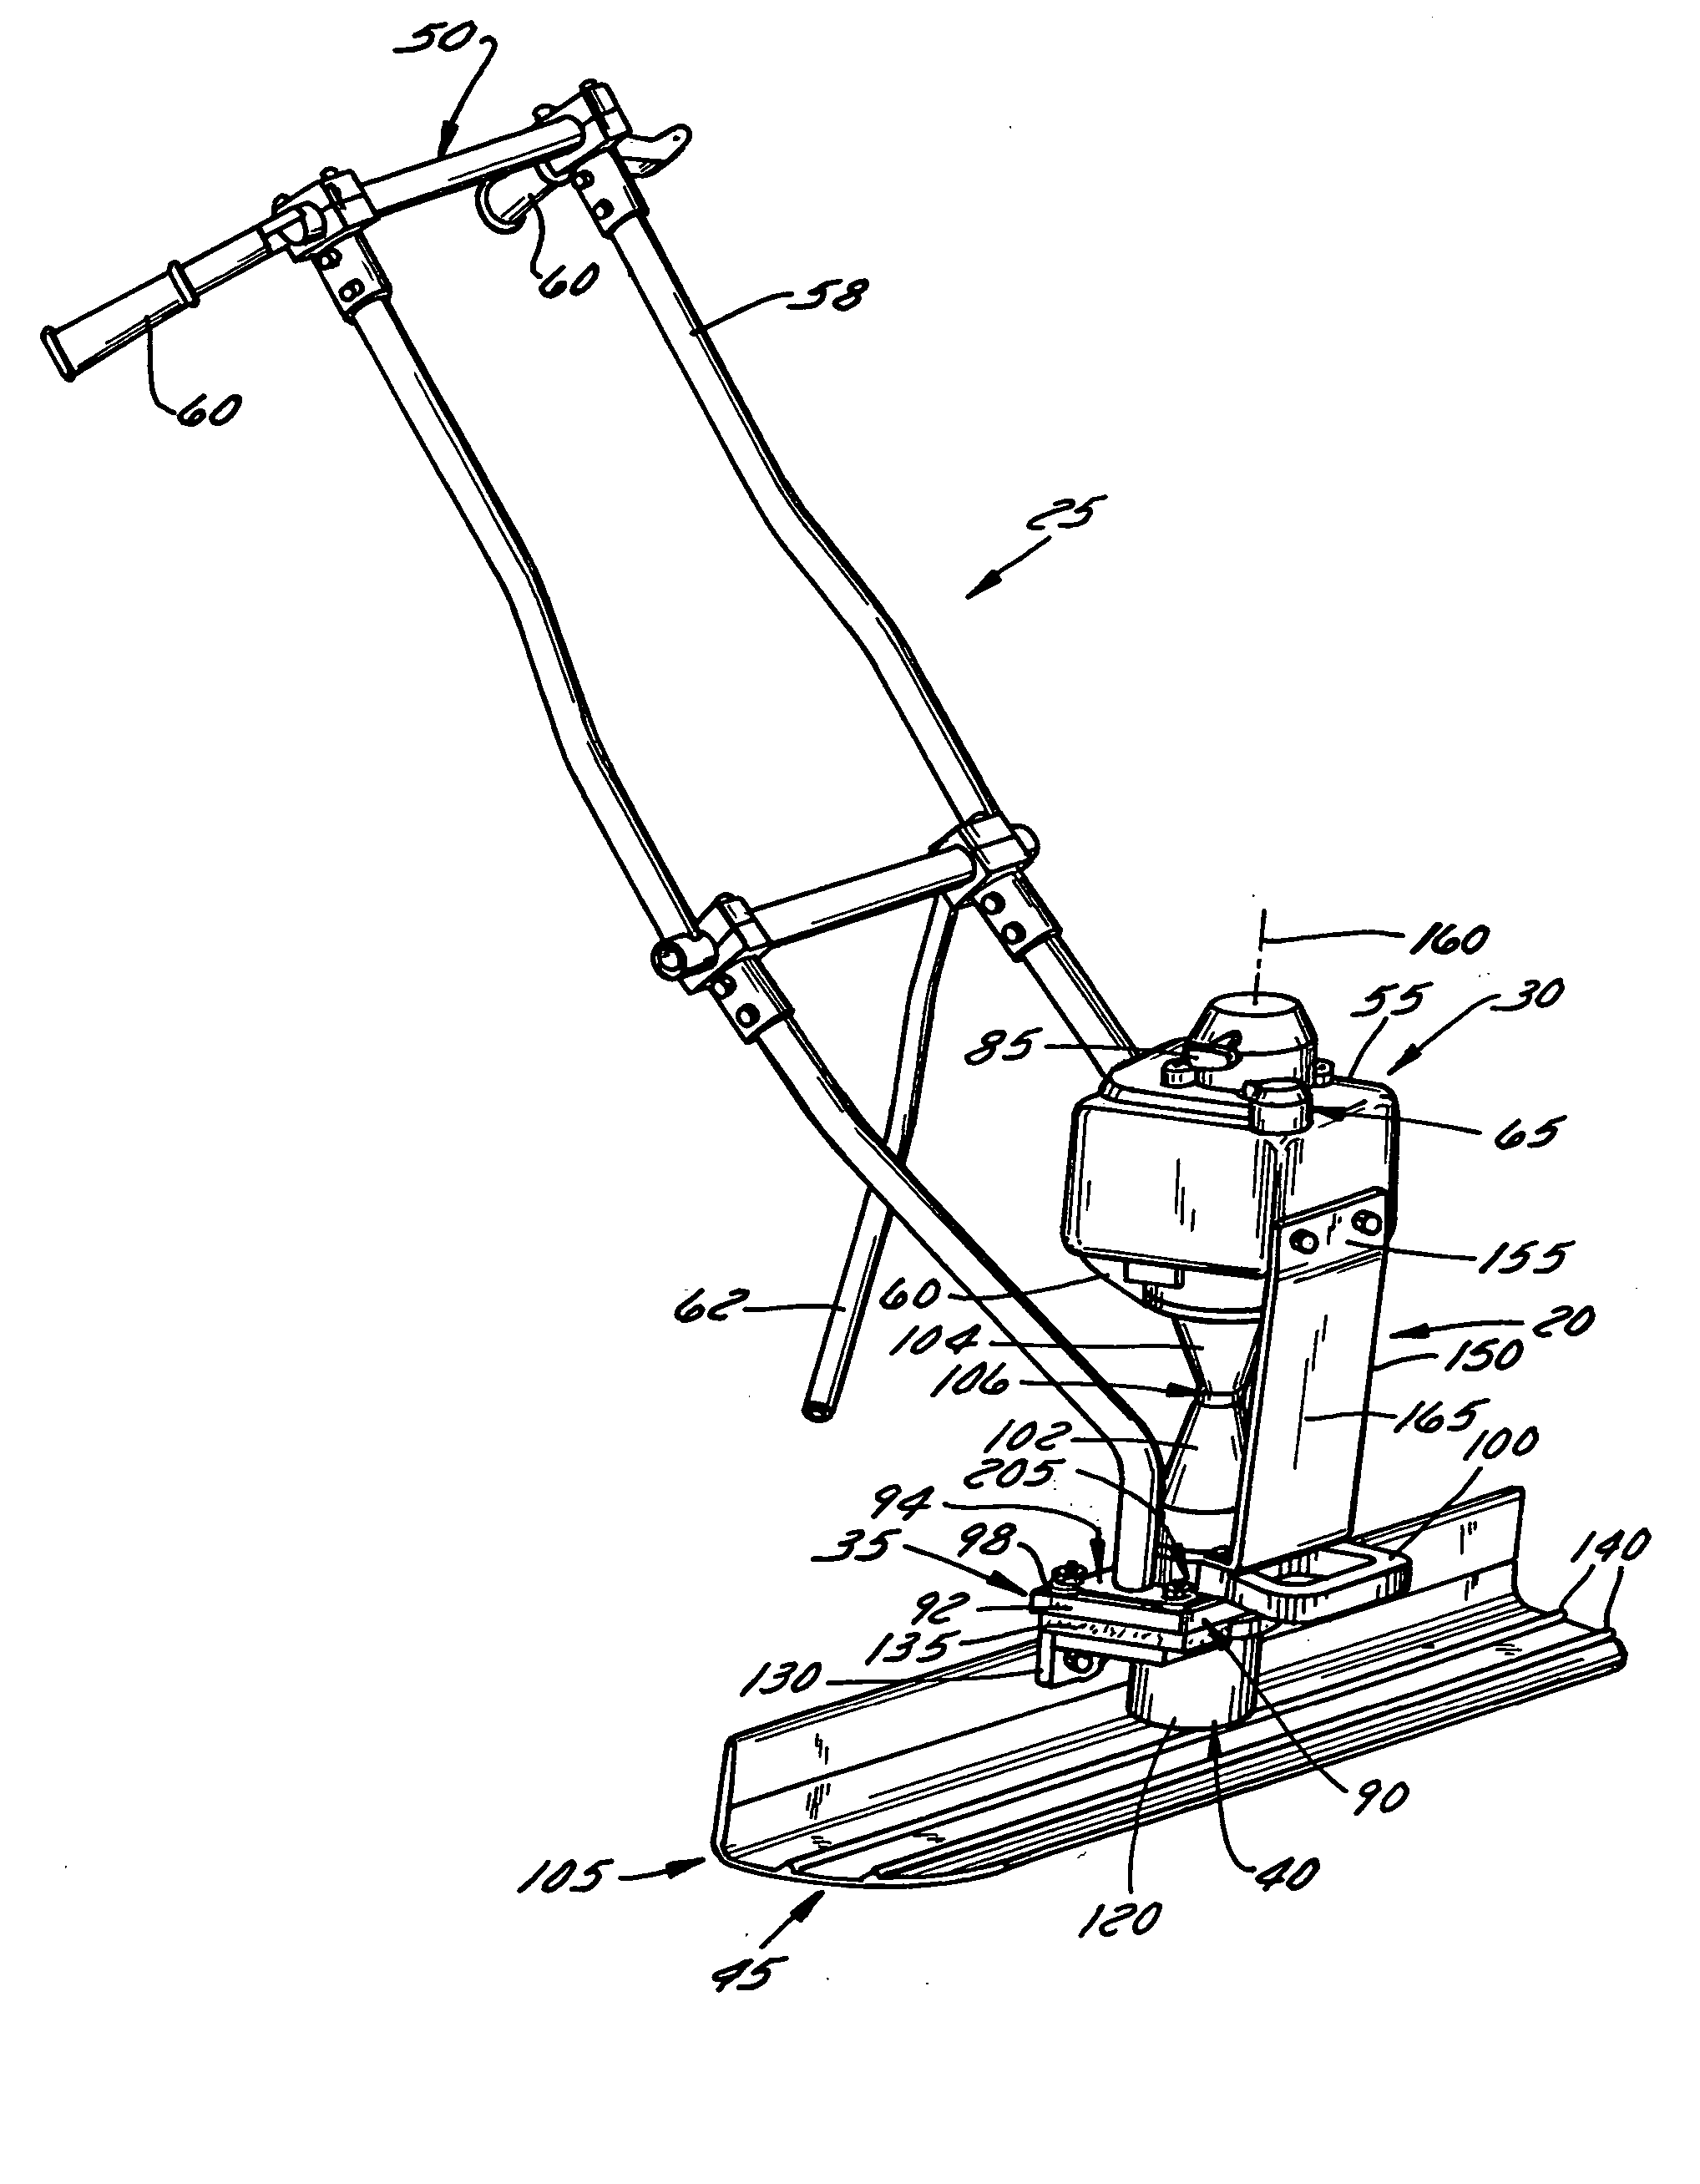 Portable vibratory screed with vibration restraint